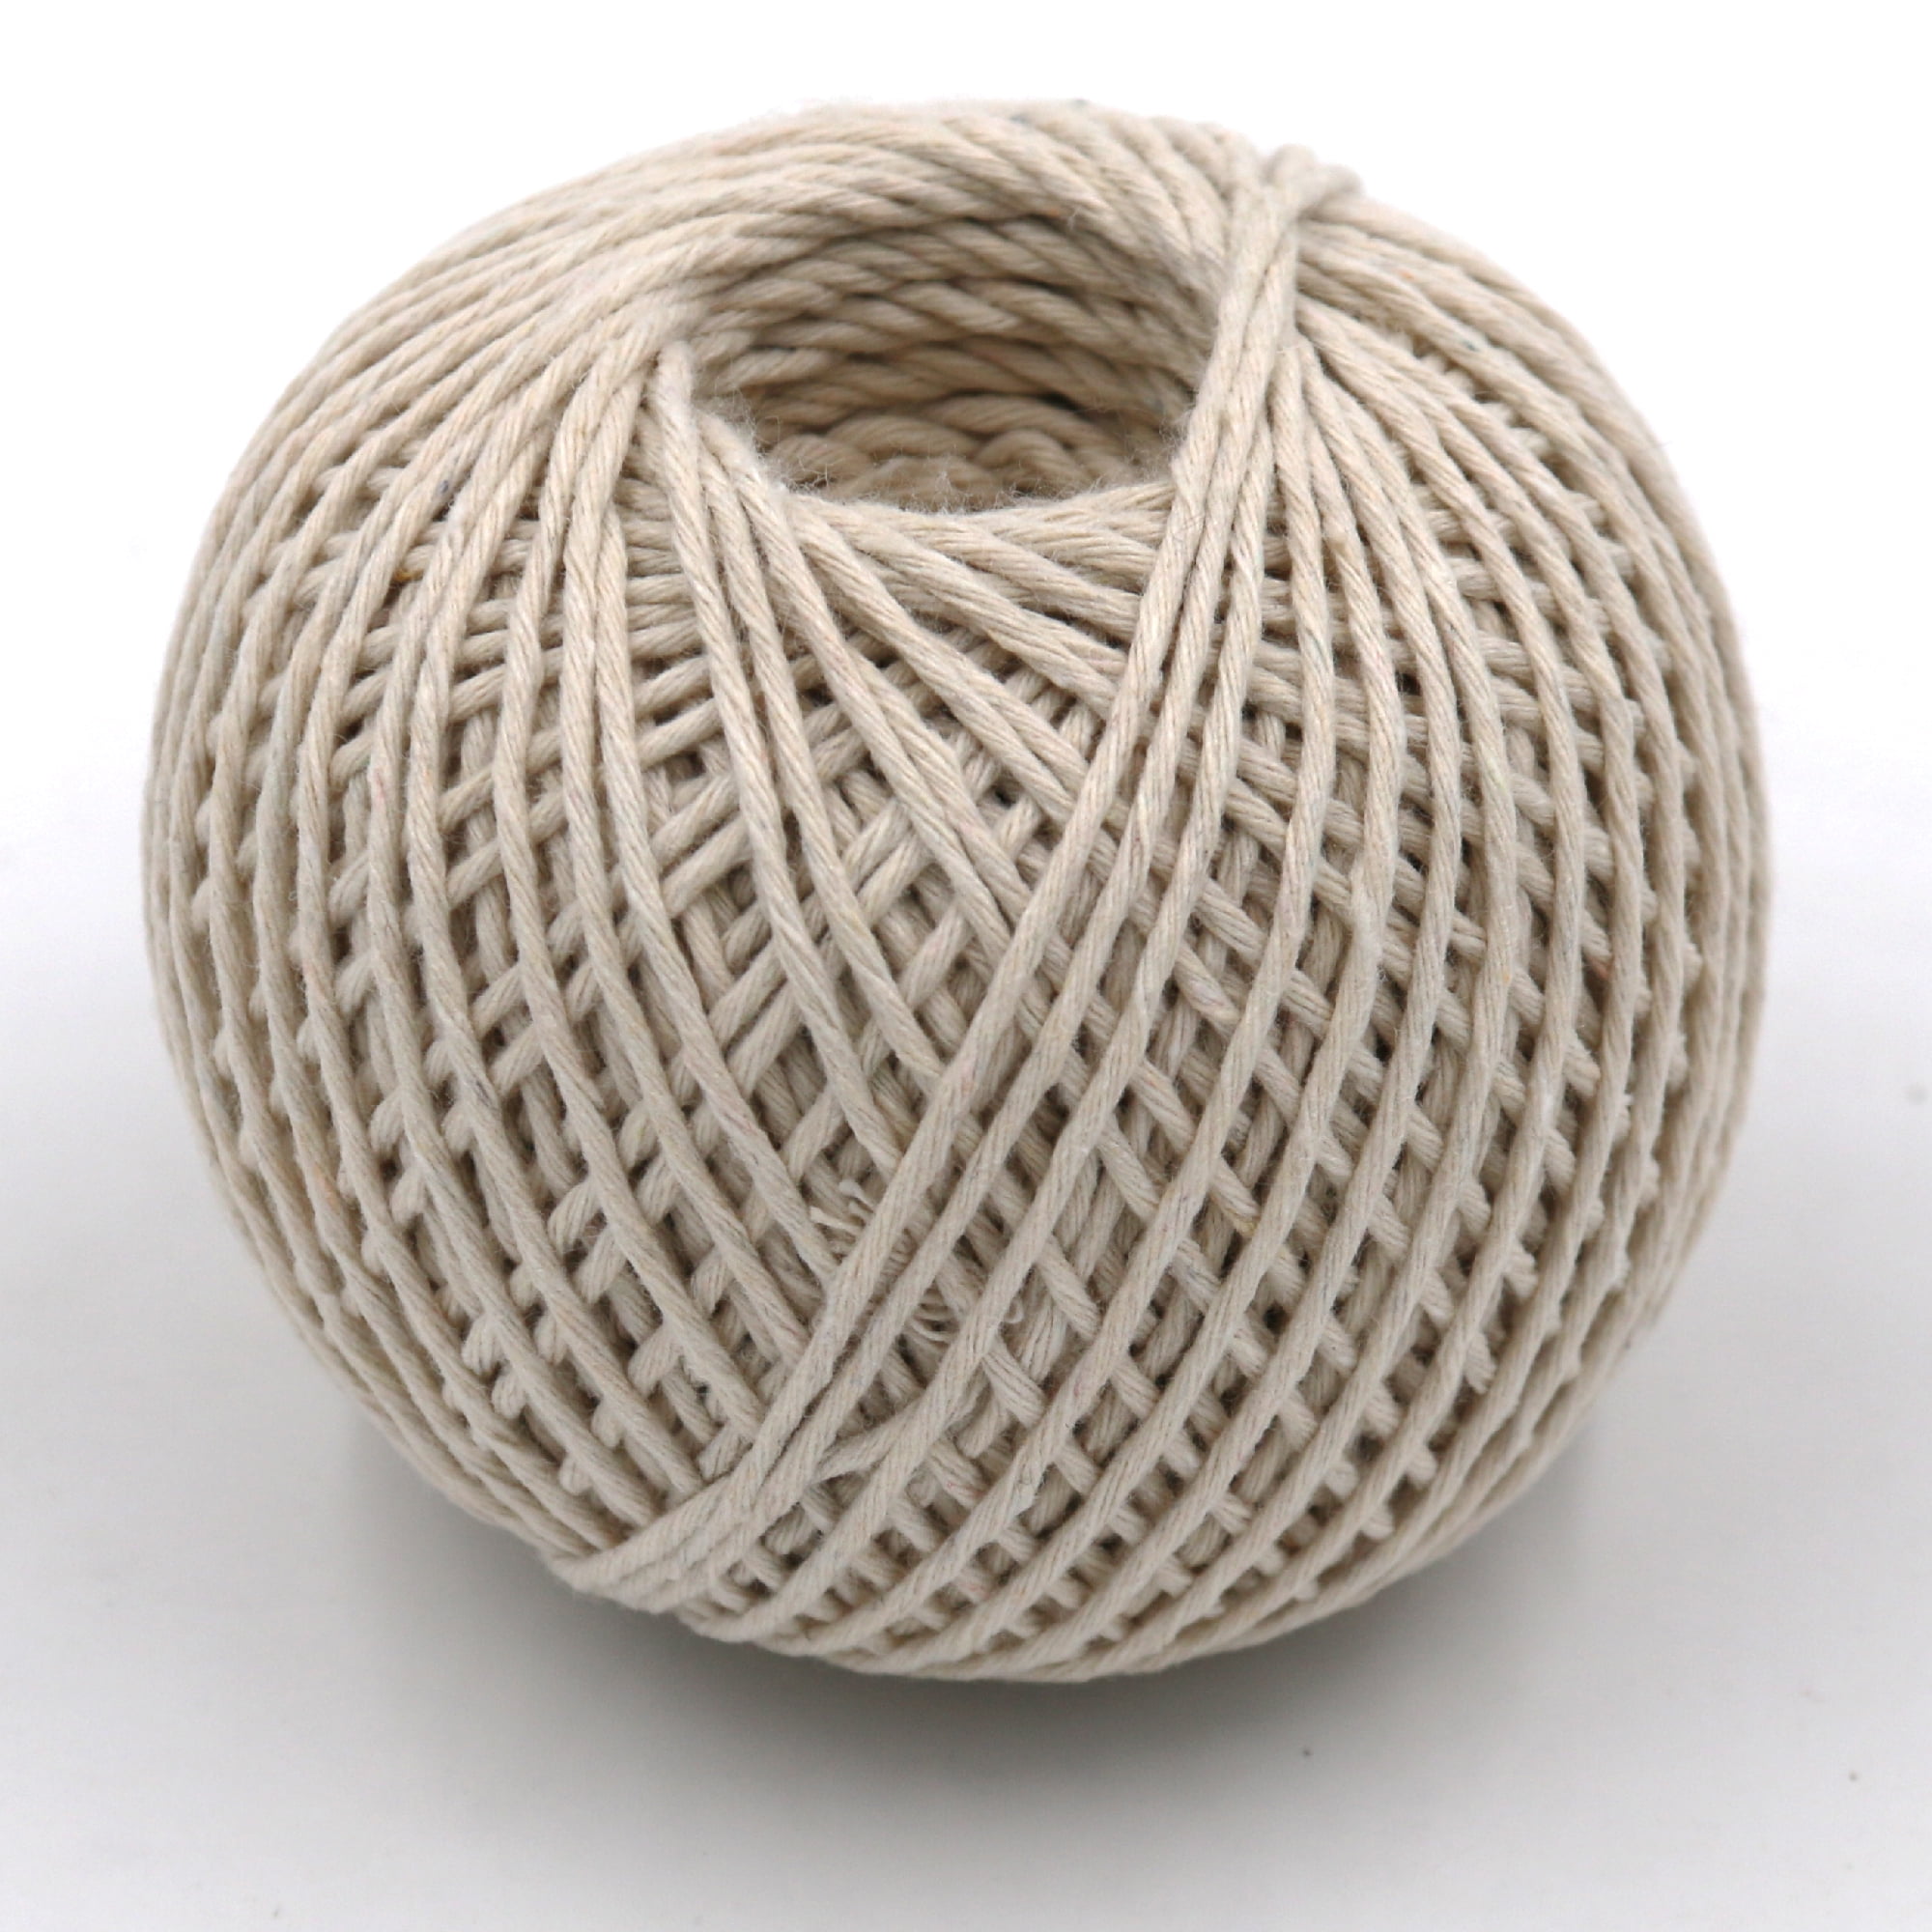 Hyper Tough 420 feet Cotton Household Twine, Natural Color